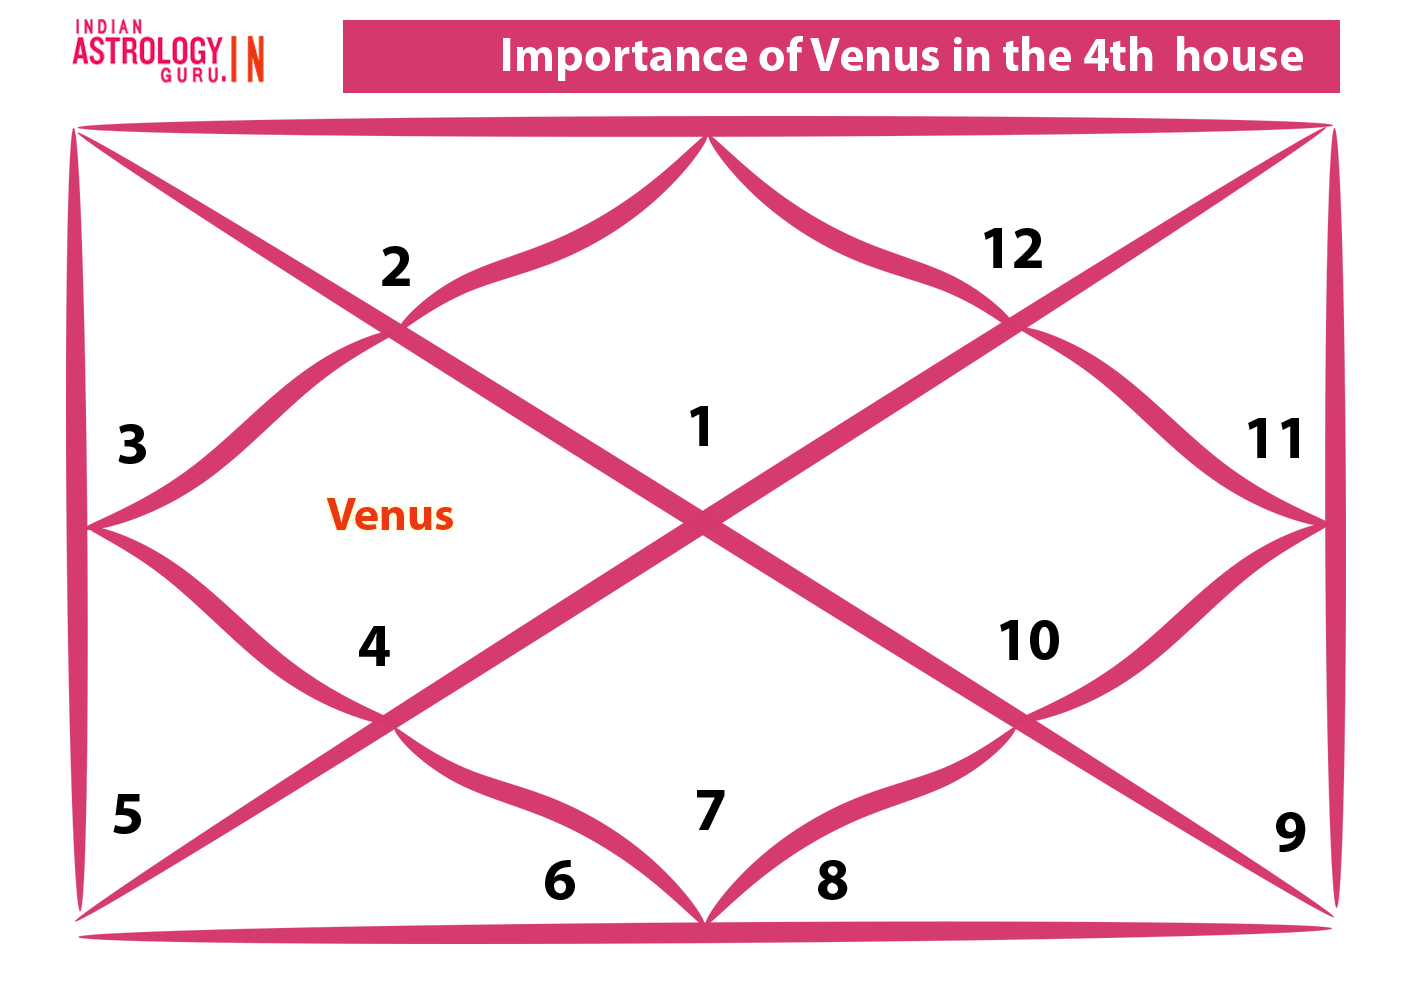 Venus in the 4th house